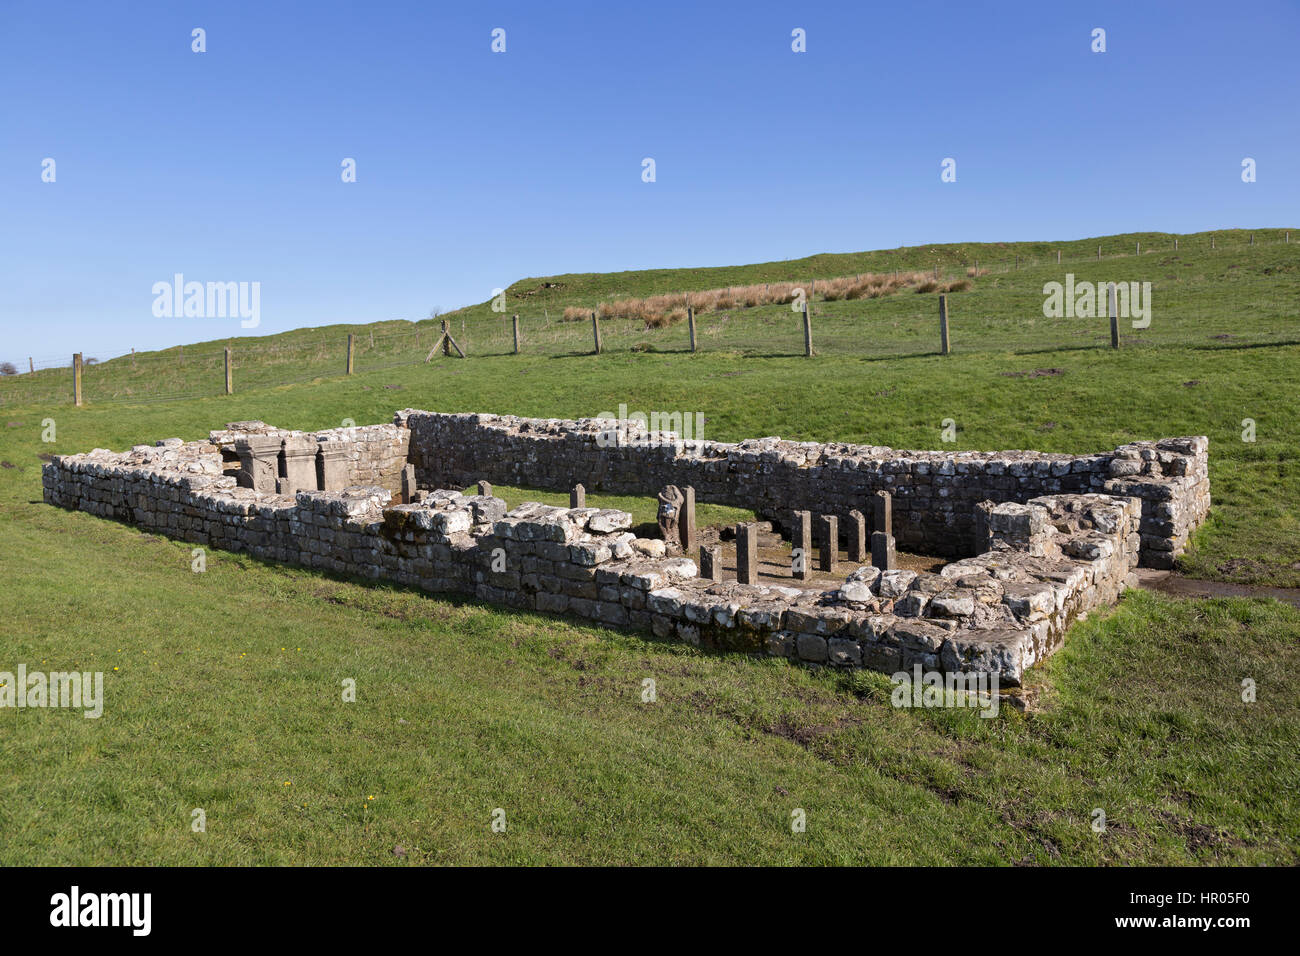 Hadrian's Wall: the remains of the Mithraeum near Carrawburgh (Brocilitia) Roman fort, Northumberland Stock Photo